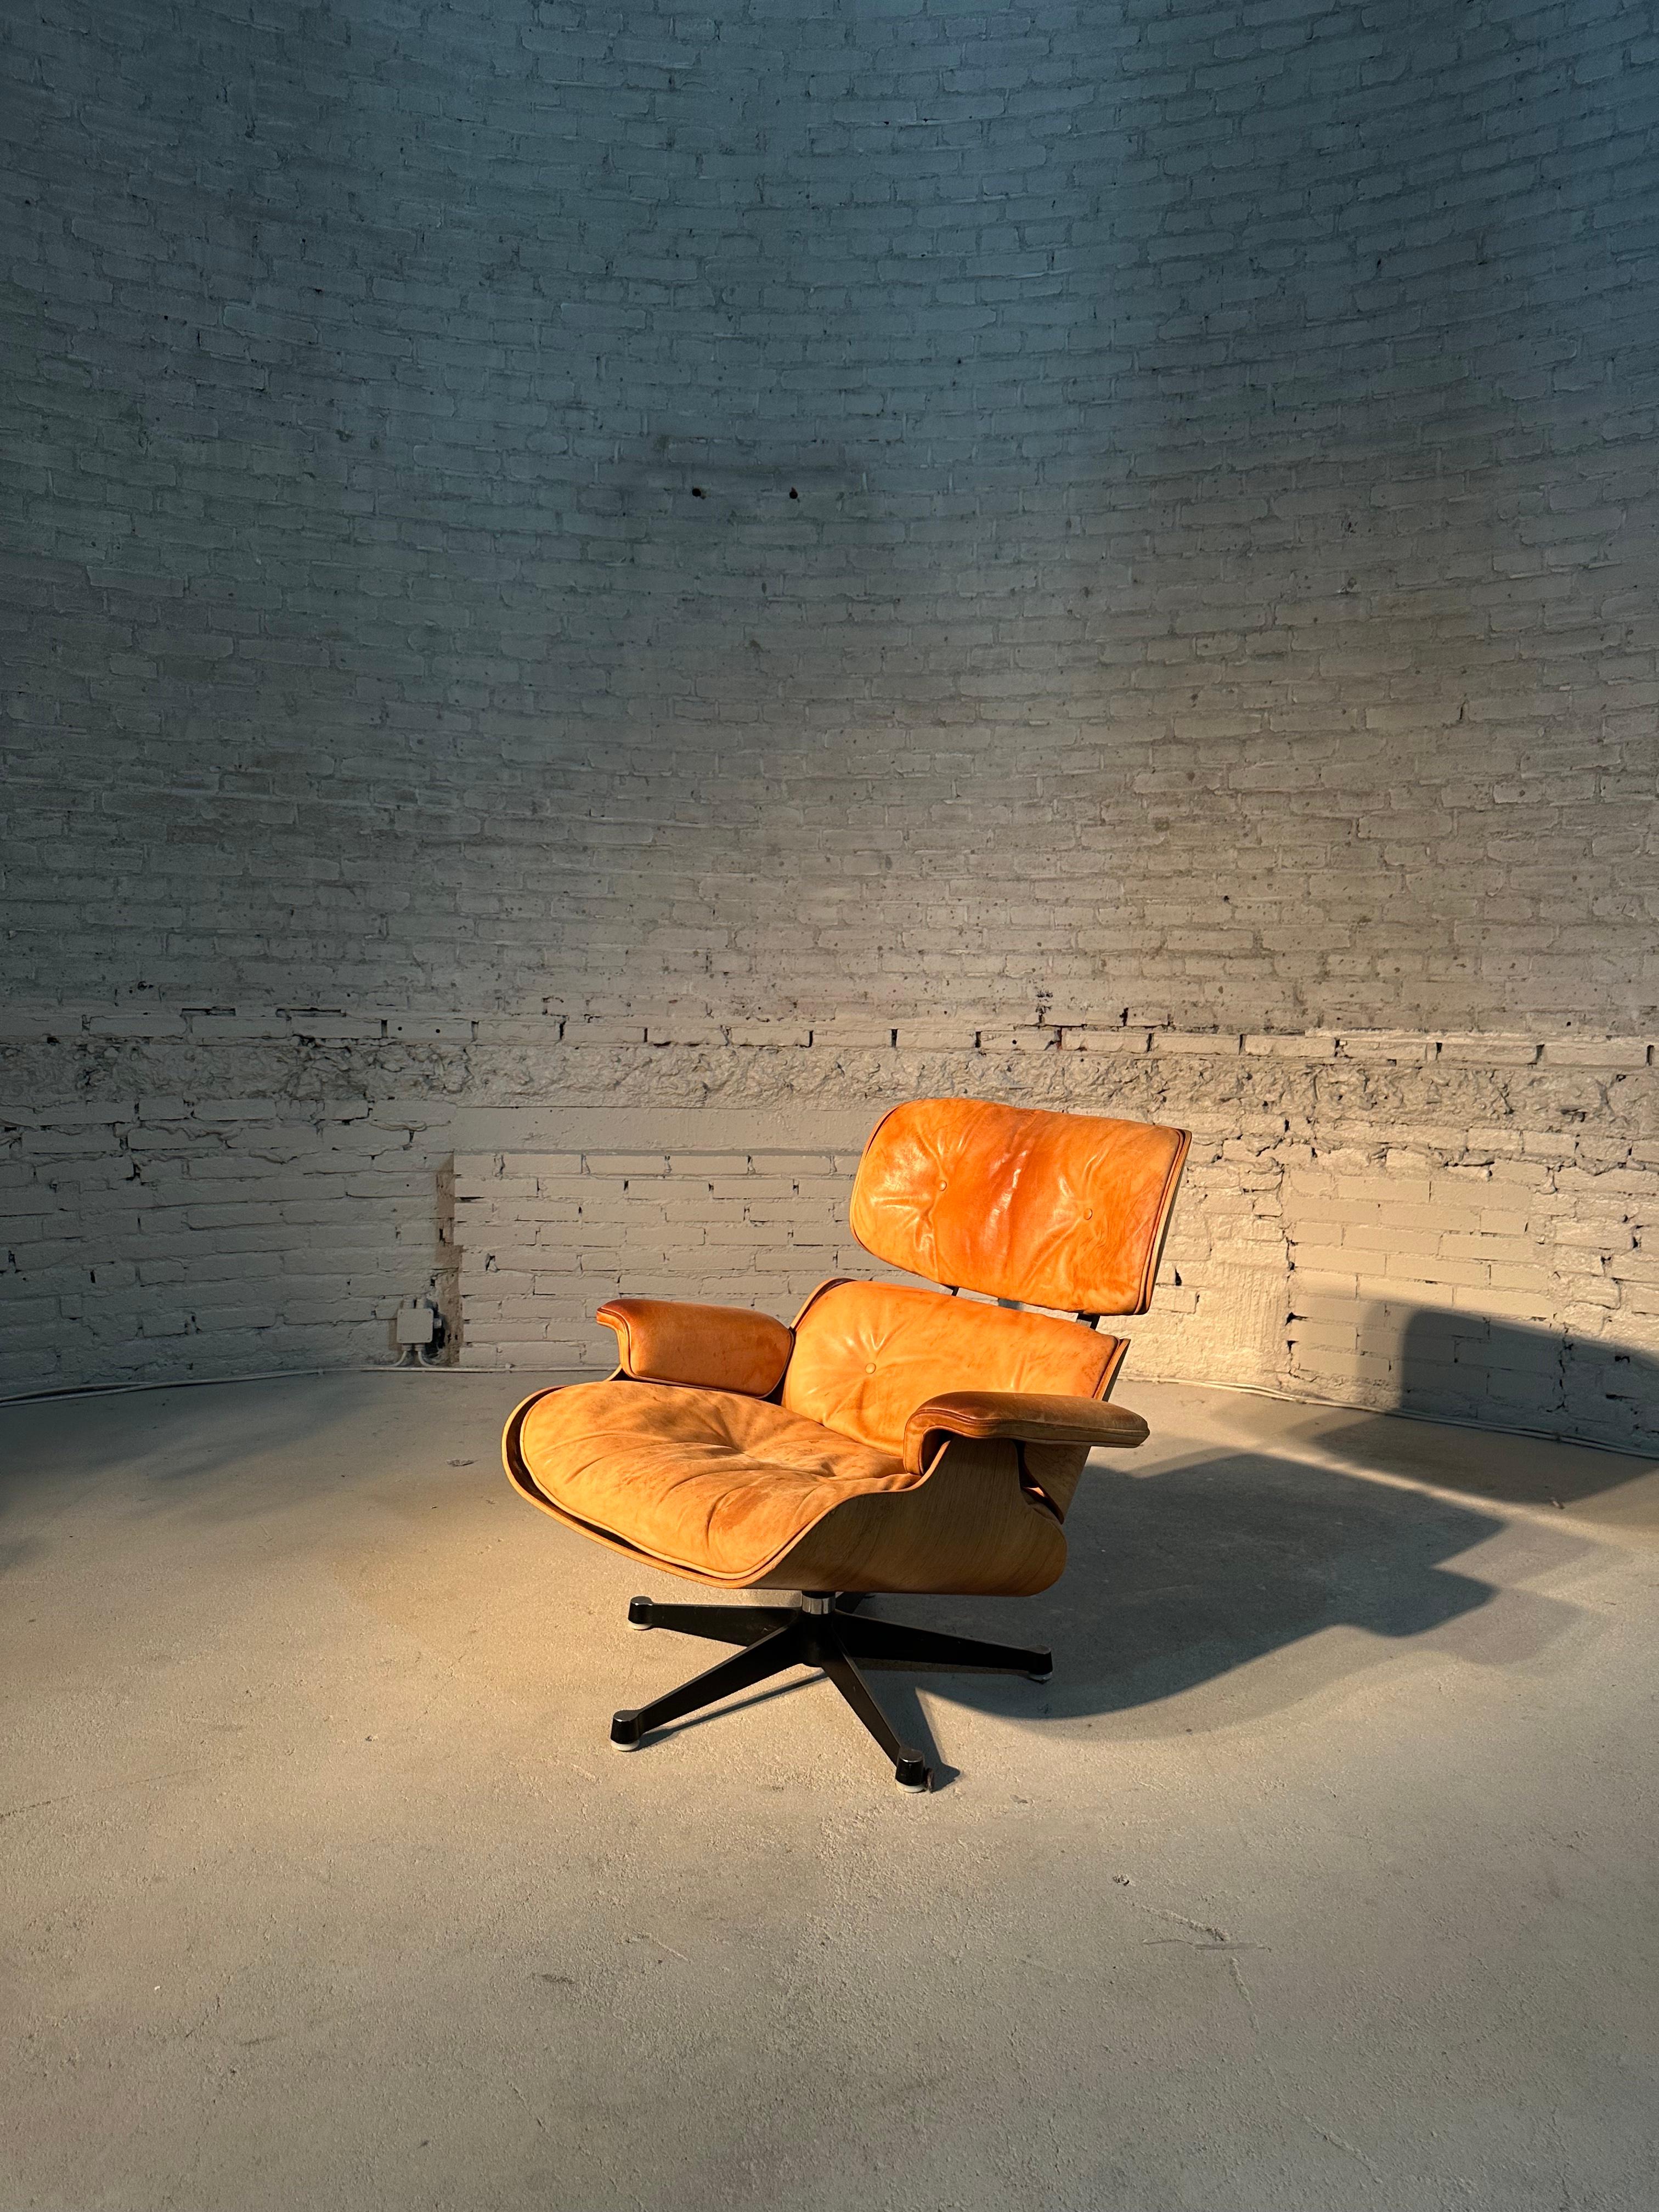 A unique set of Lounge Chairs plus Ottoman by Charles and Ray Eames for Herman Miller.

Beautiful edition of the classic Eames Lounge chair (model 670) and Ottoman (model 671). Executed in palissander and cognac leather in an amazing patina.